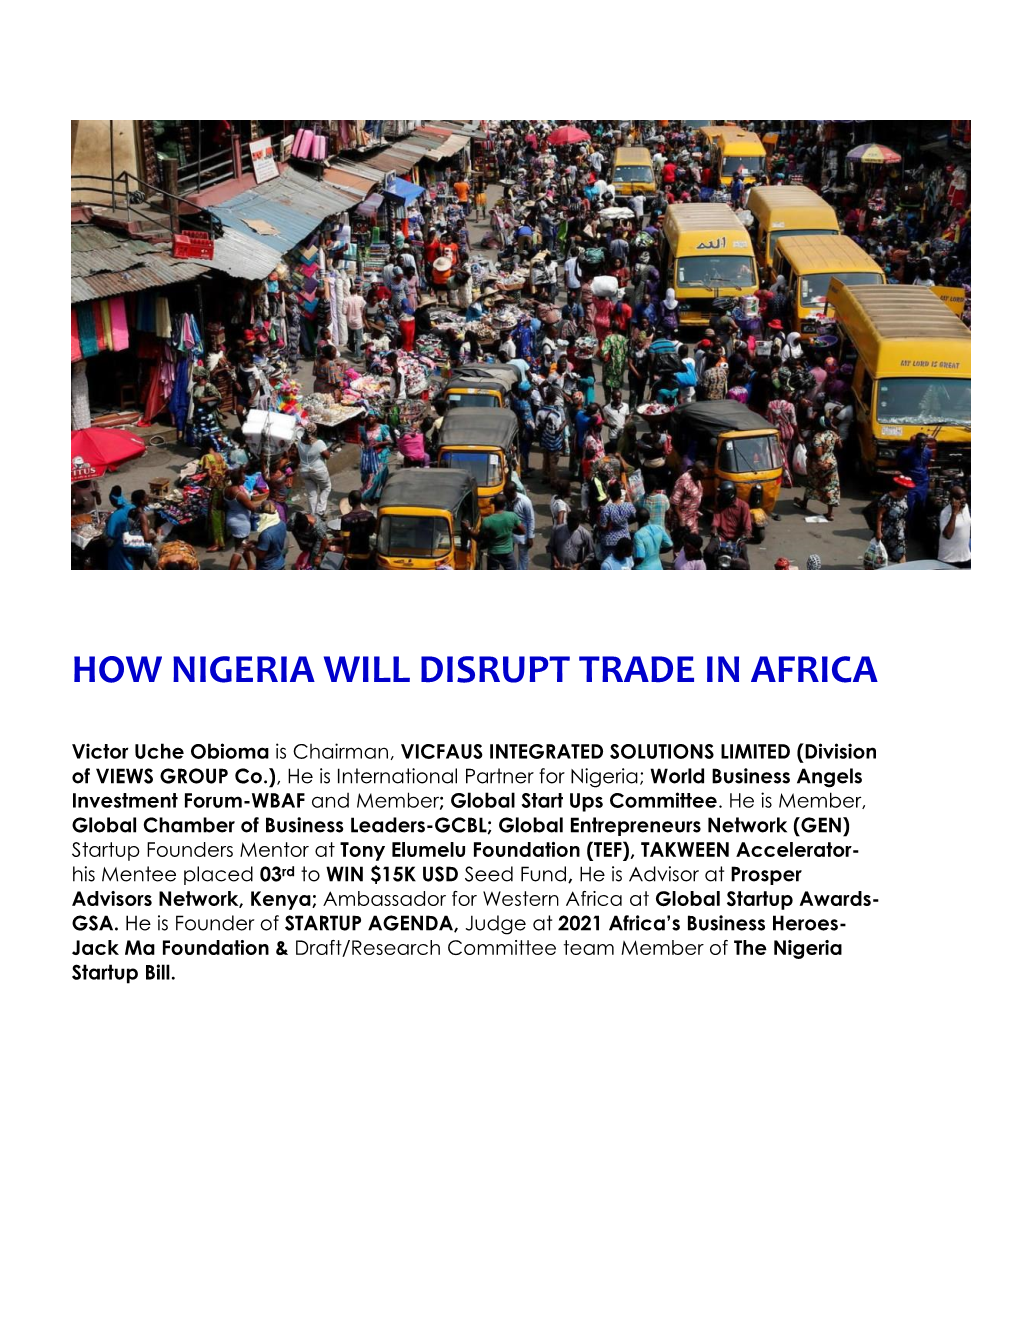 How Nigeria Will Disrupt Trade in Africa